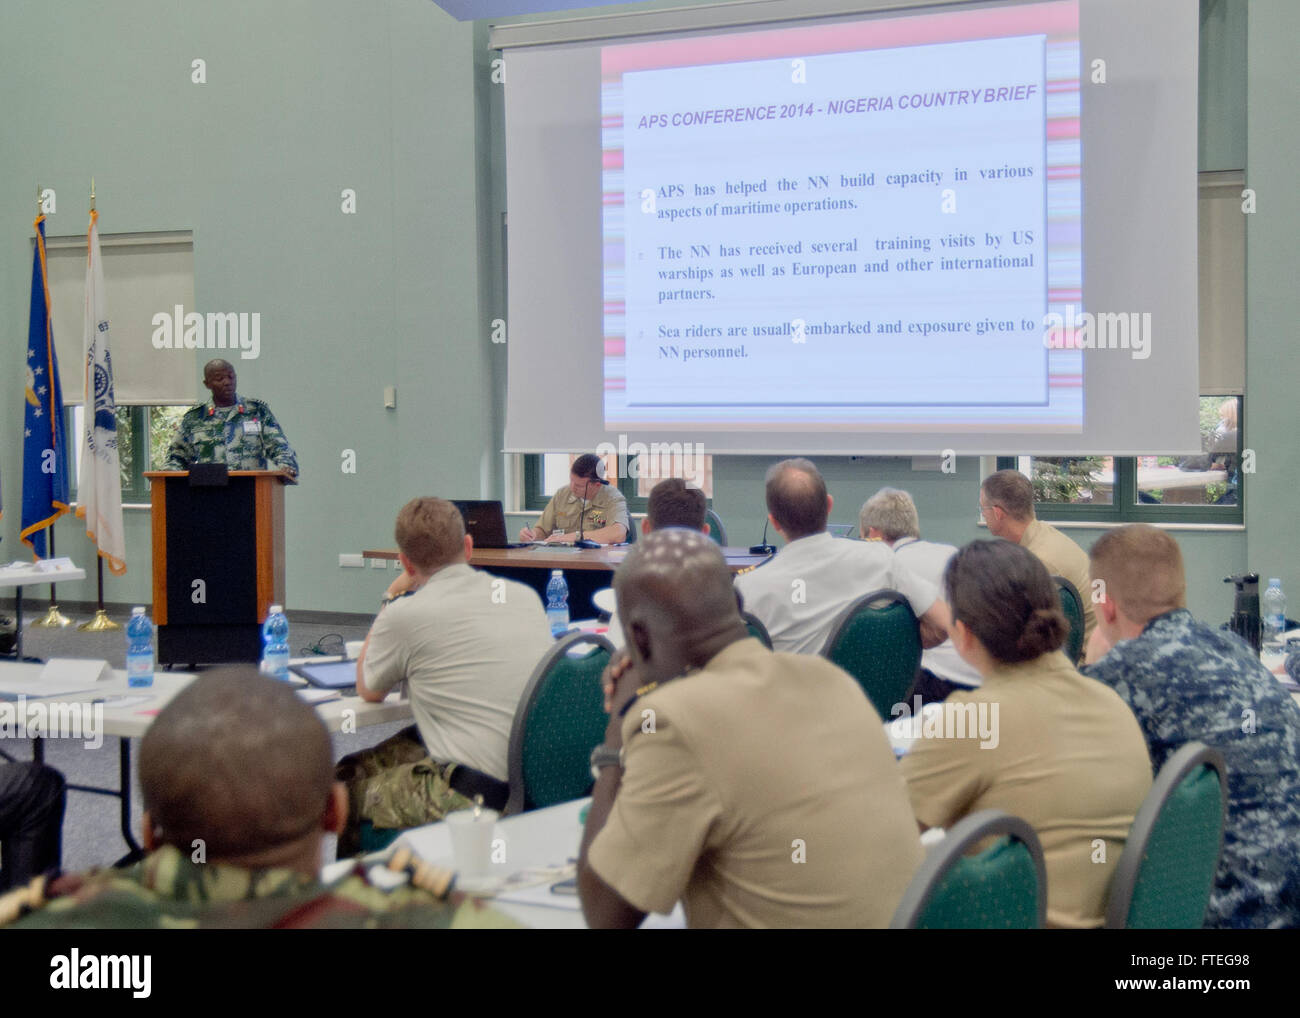 140915-N-EZ054-001 NAPLES, Italy (Sept.15, 2014) Nigerian Navy Capt. Saidu Garba presents his nation’s Africa Partnership Station (APS) brief during the APS Annual Planning Conference held at Naval Support Activity (NSA) Naples. APS, established in 2007, is a collaborative international security cooperation initiative aimed at improving maritime safety and security in the waters surrounding Africa by developing African maritime forces’ information sharing practices, response capabilities, and regional interoperability.  (U.S. Navy Photo by Mass Communication Specialist 3rd Class Luis R. Chavez Stock Photo